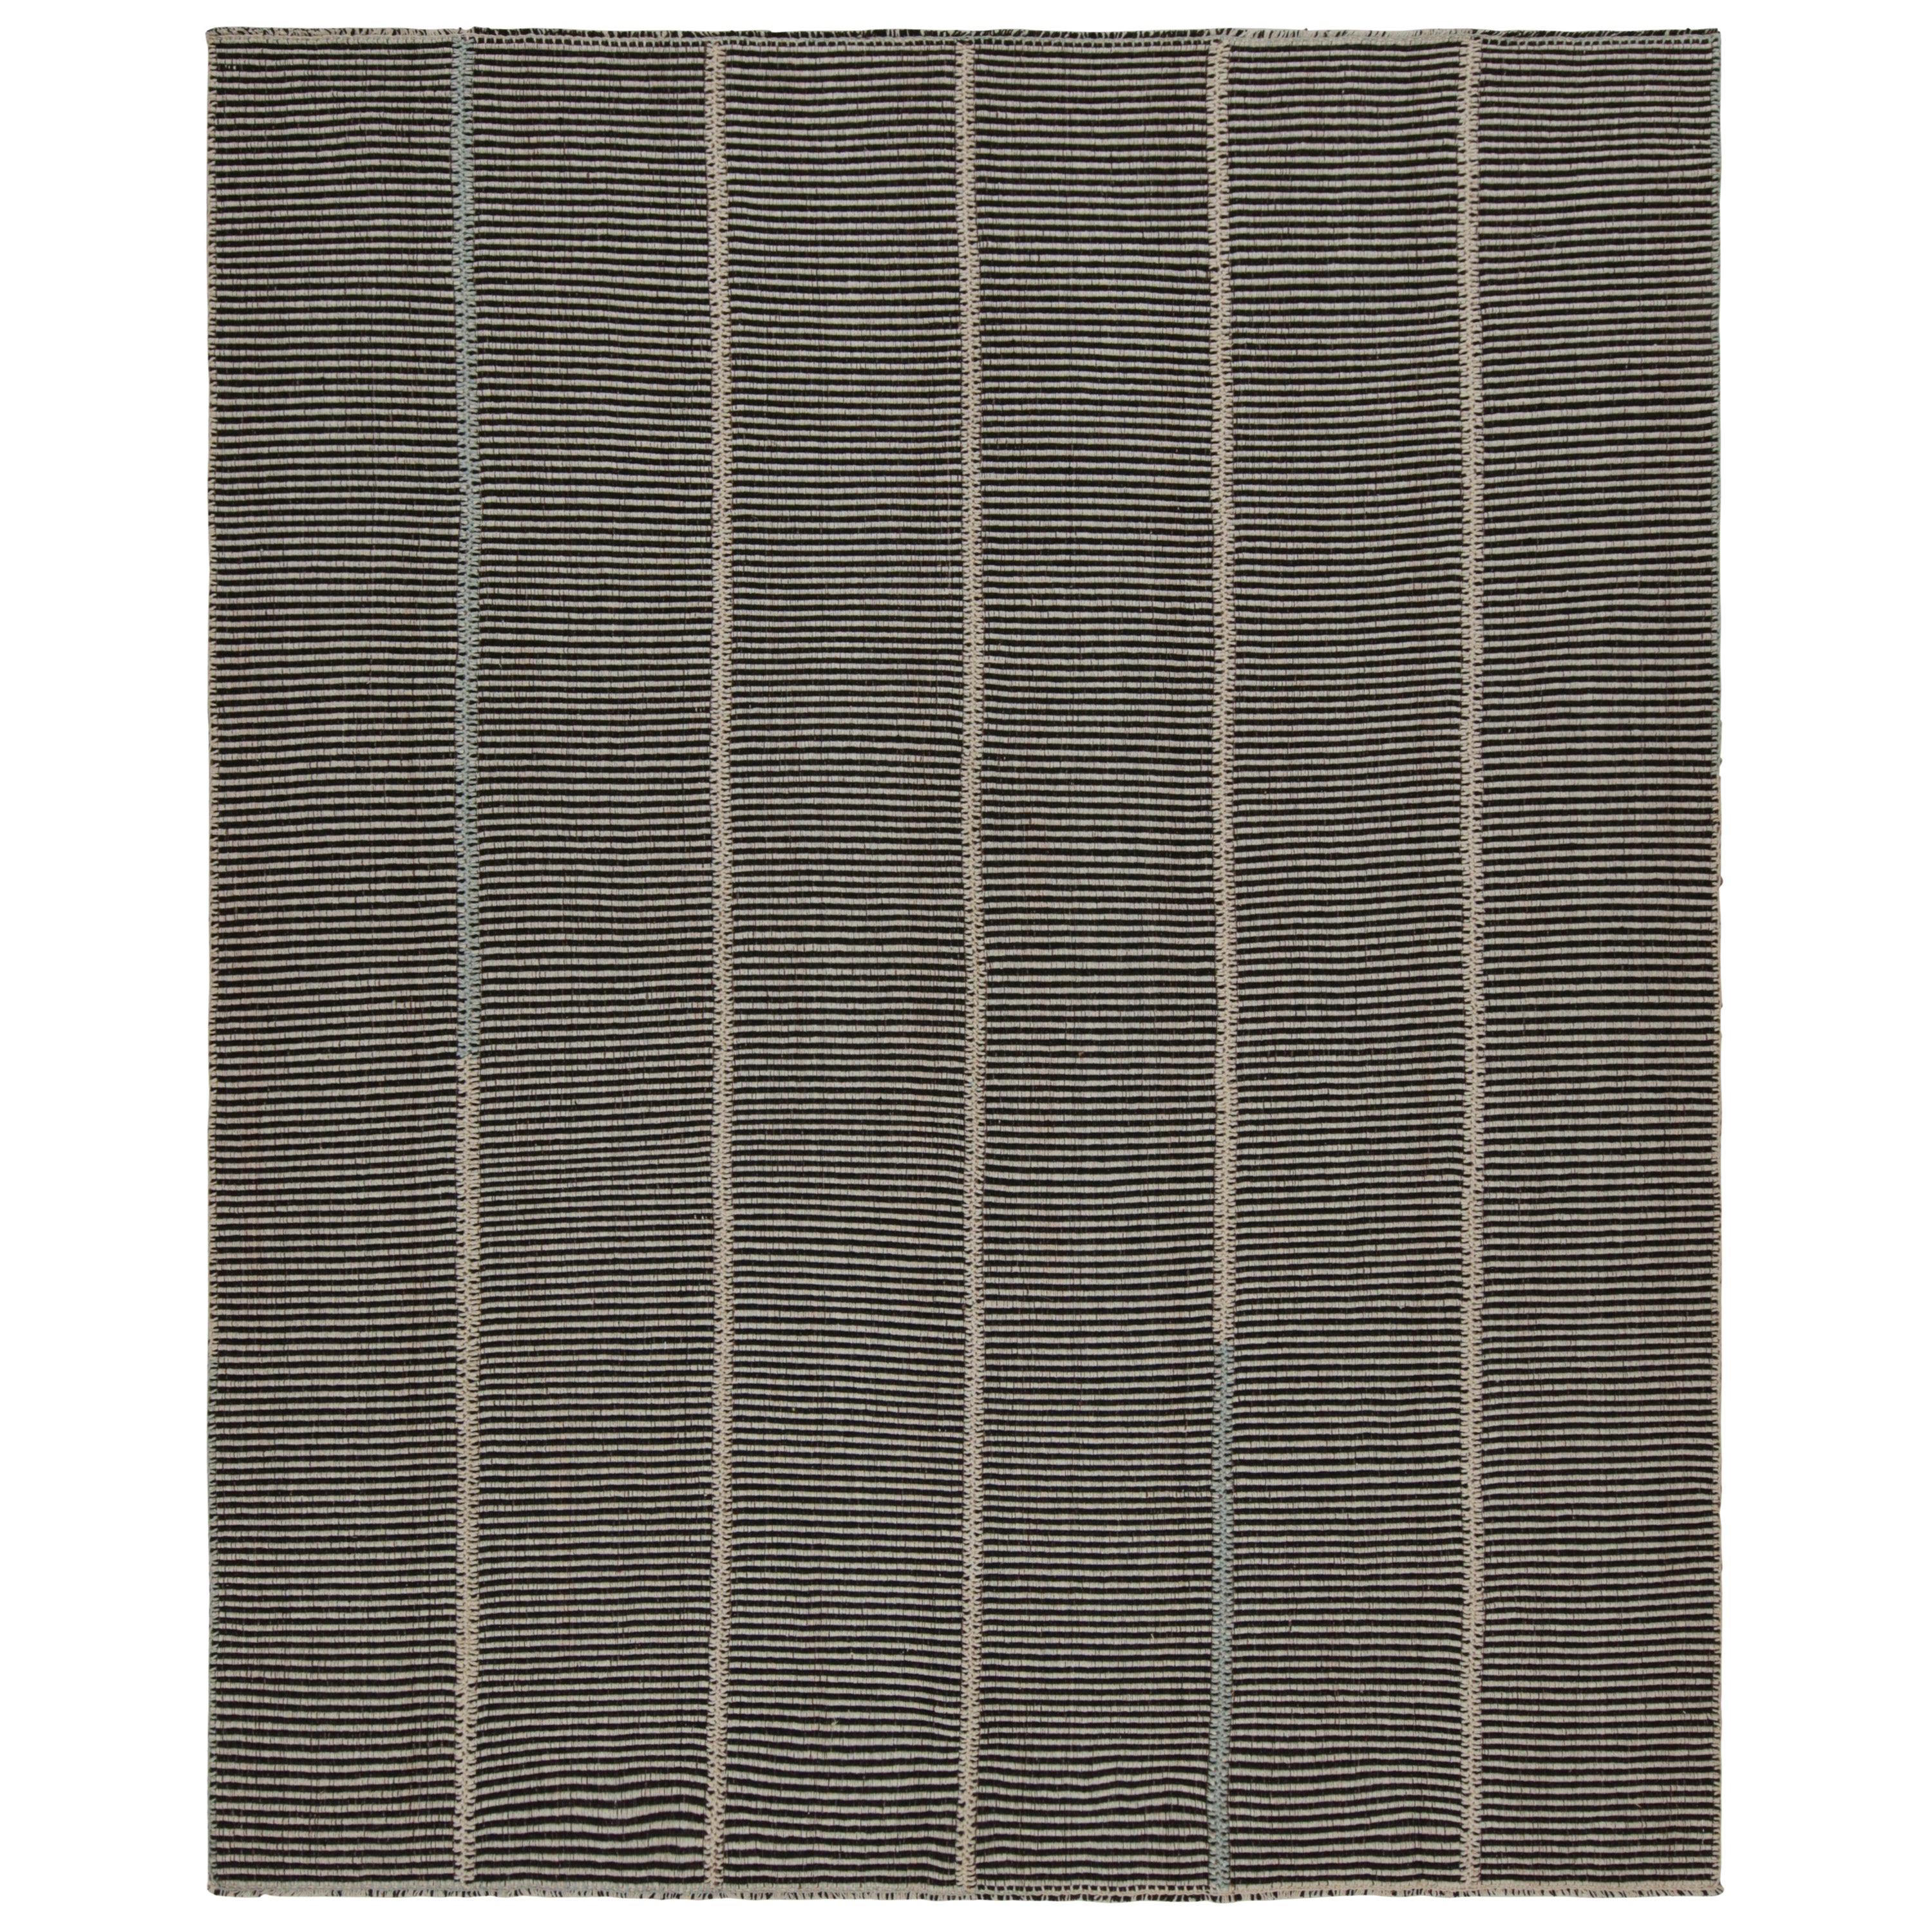 Rug & Kilim’s Contemporary Kilim in Brown, with Beige and Blue Accents